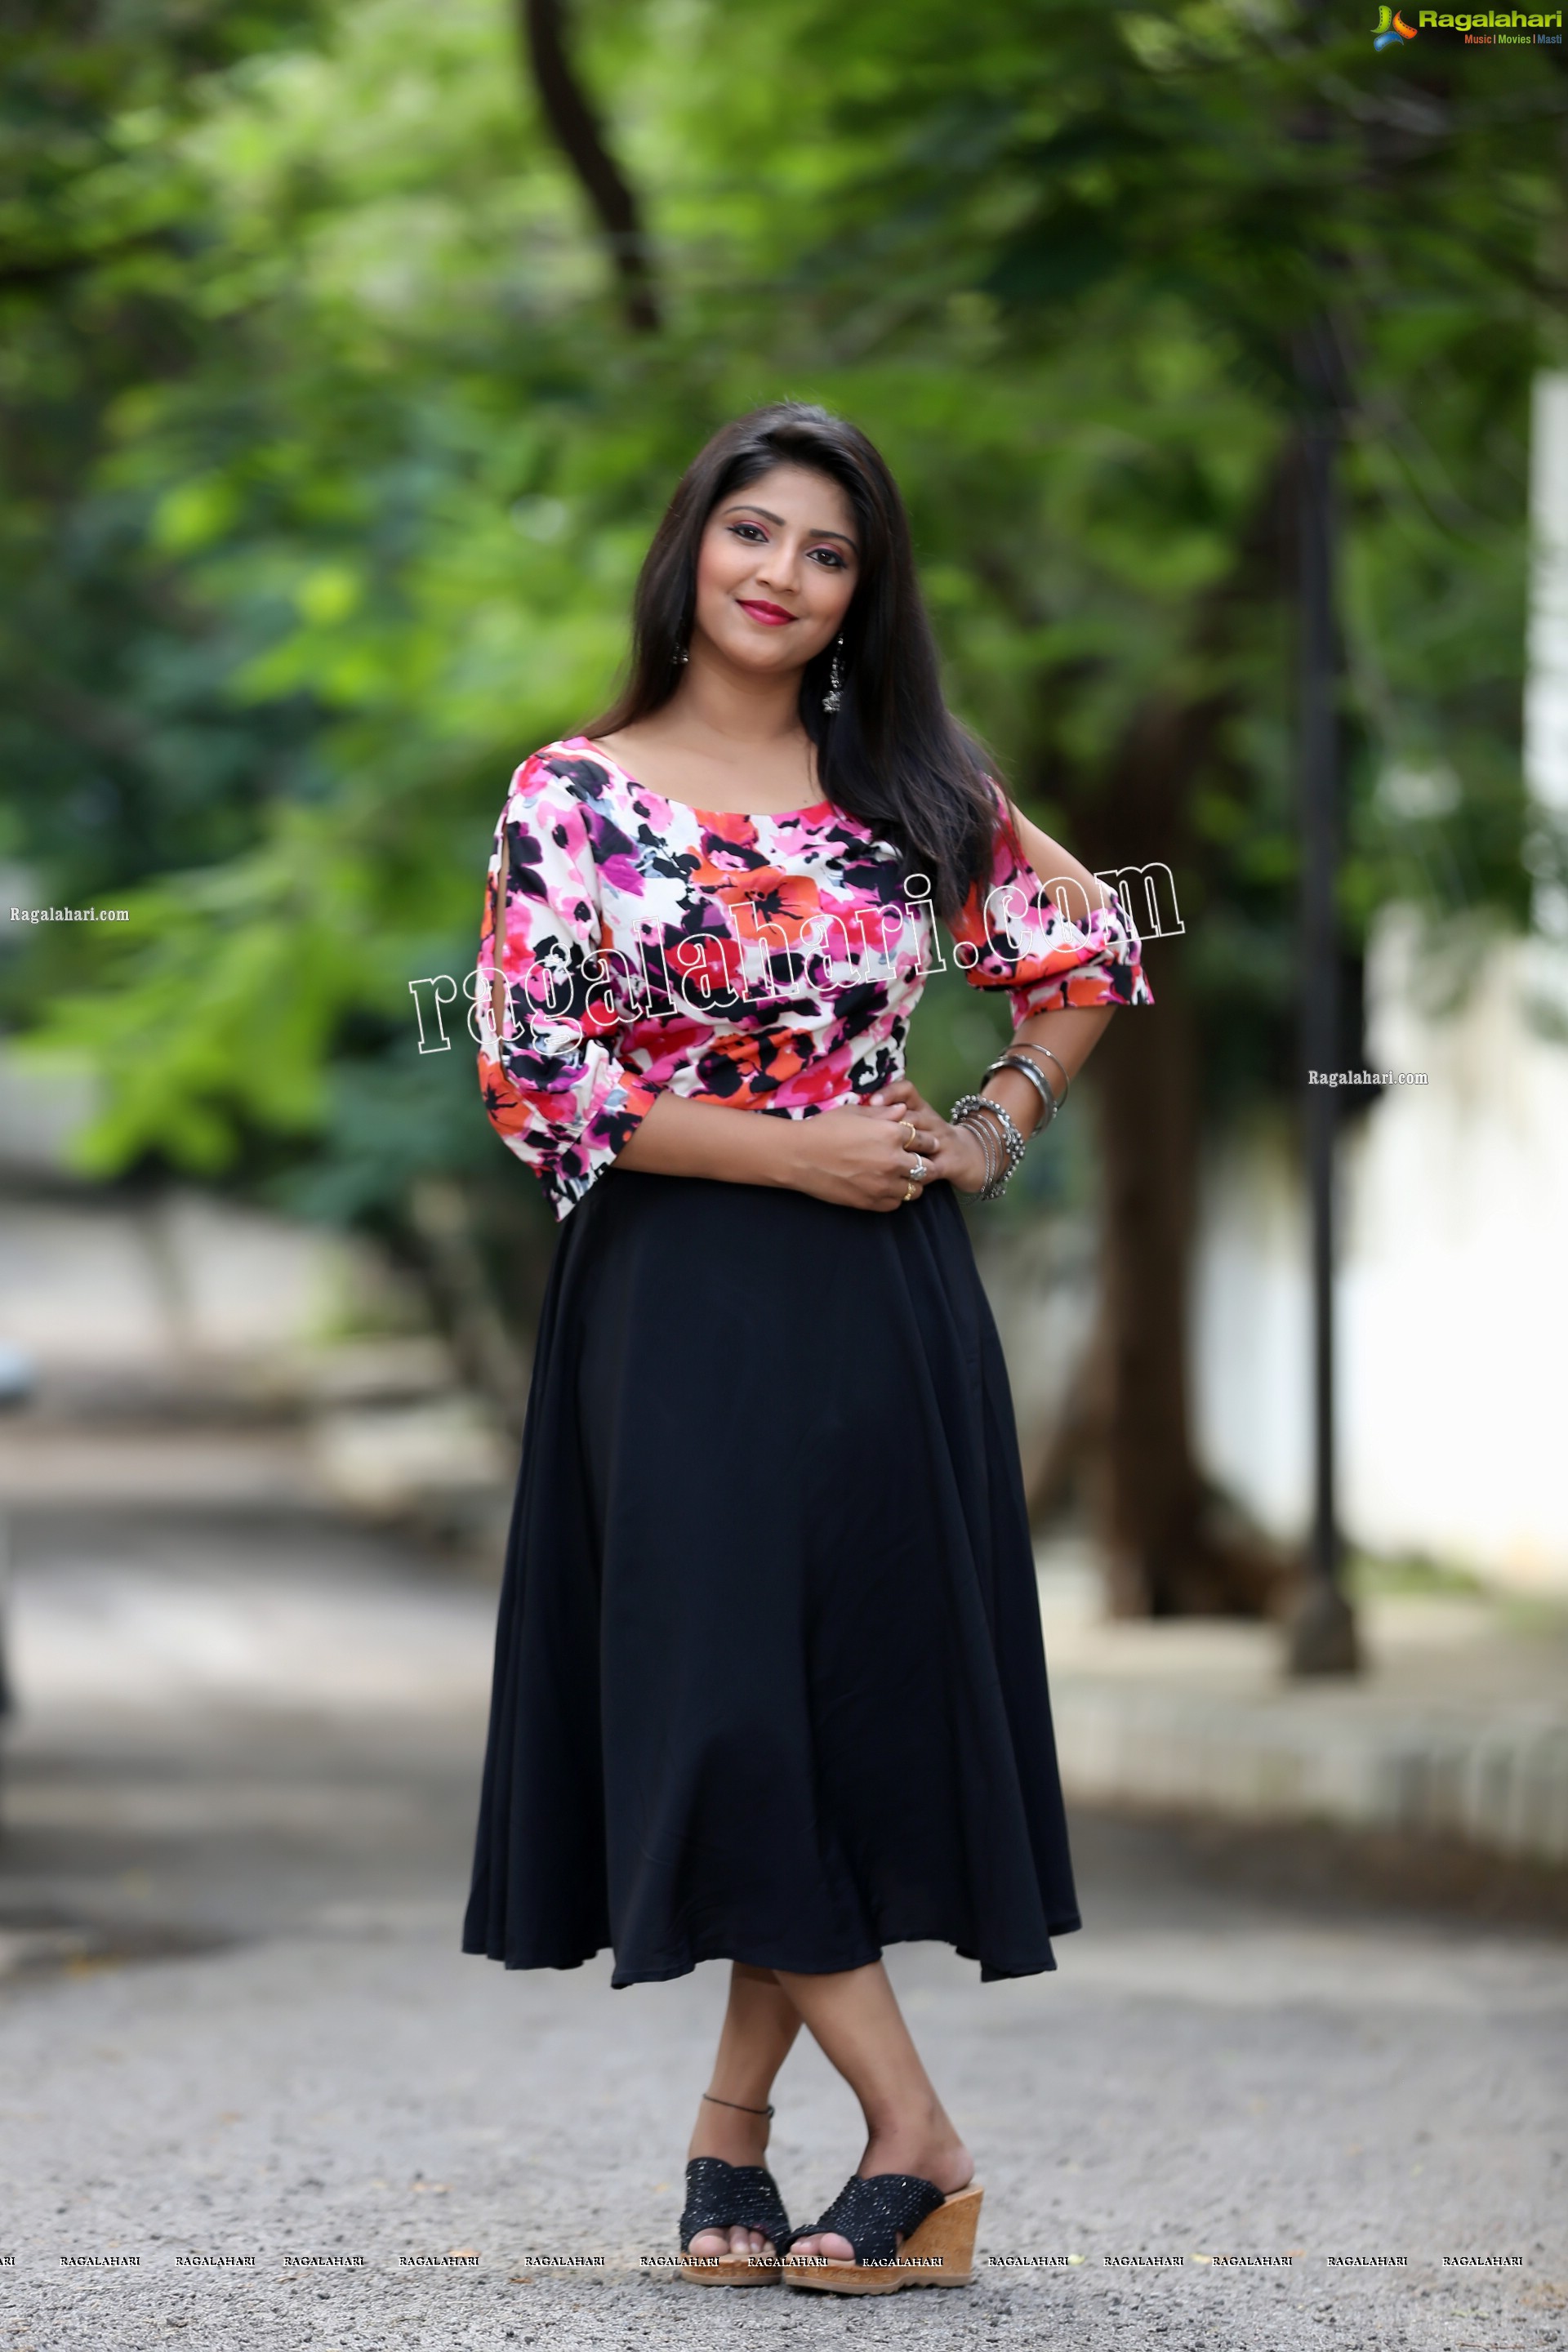 Shabeena Shaik in Blue Floral Top and Black Skirt Exclusive Photo Shoot